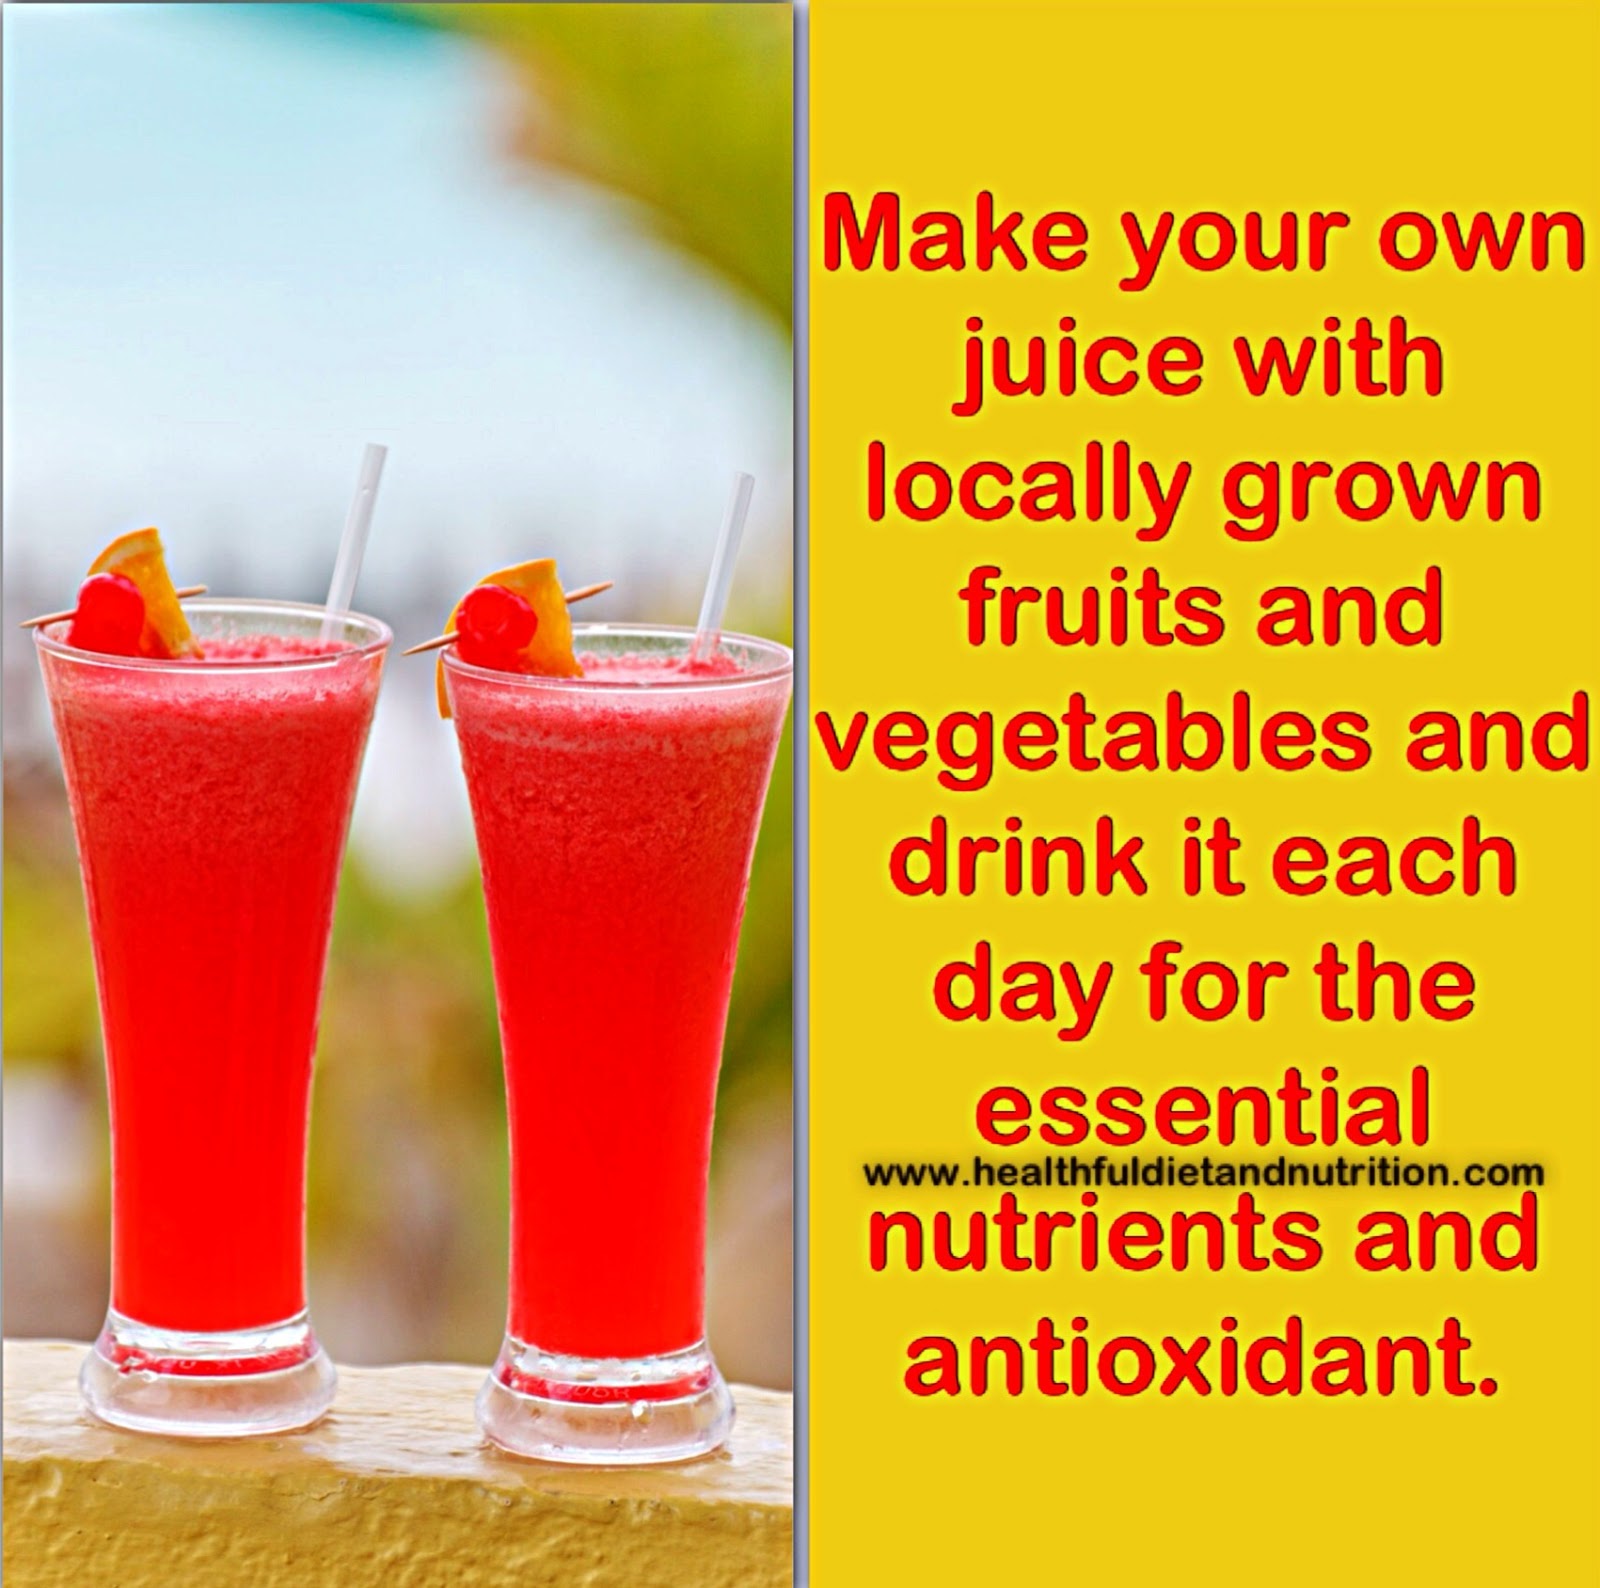 Make Your Own Juice with locally grown fruits & Veggies